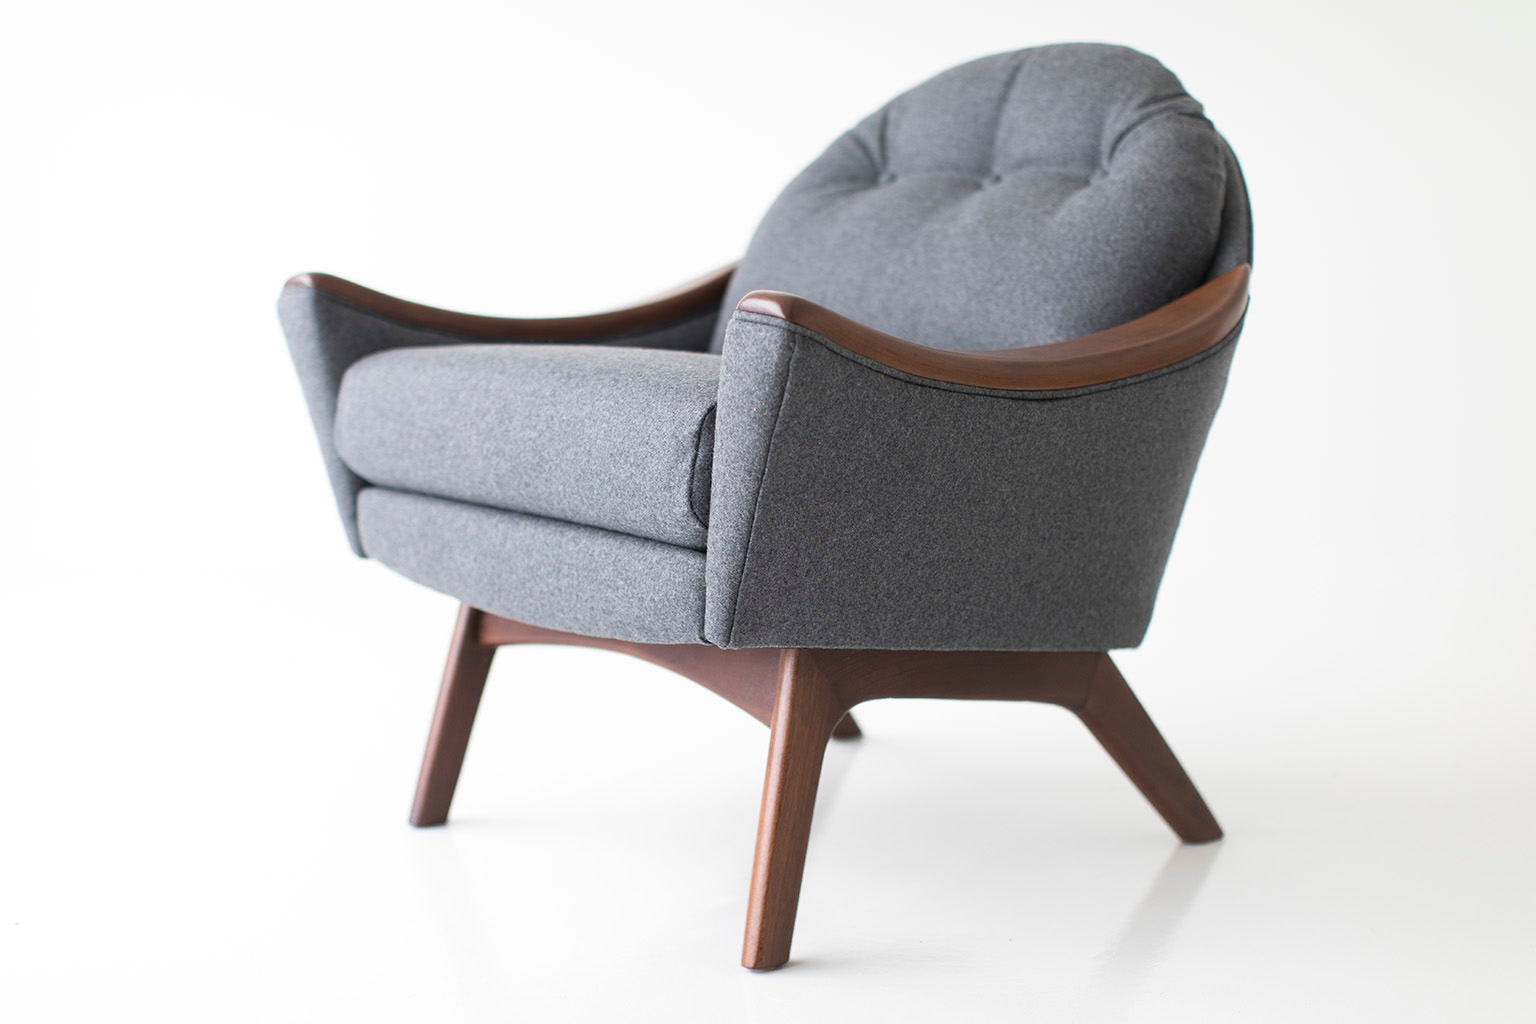 Adrian Pearsall Lounge Chairs for Craft Associates Inc. - 01091803